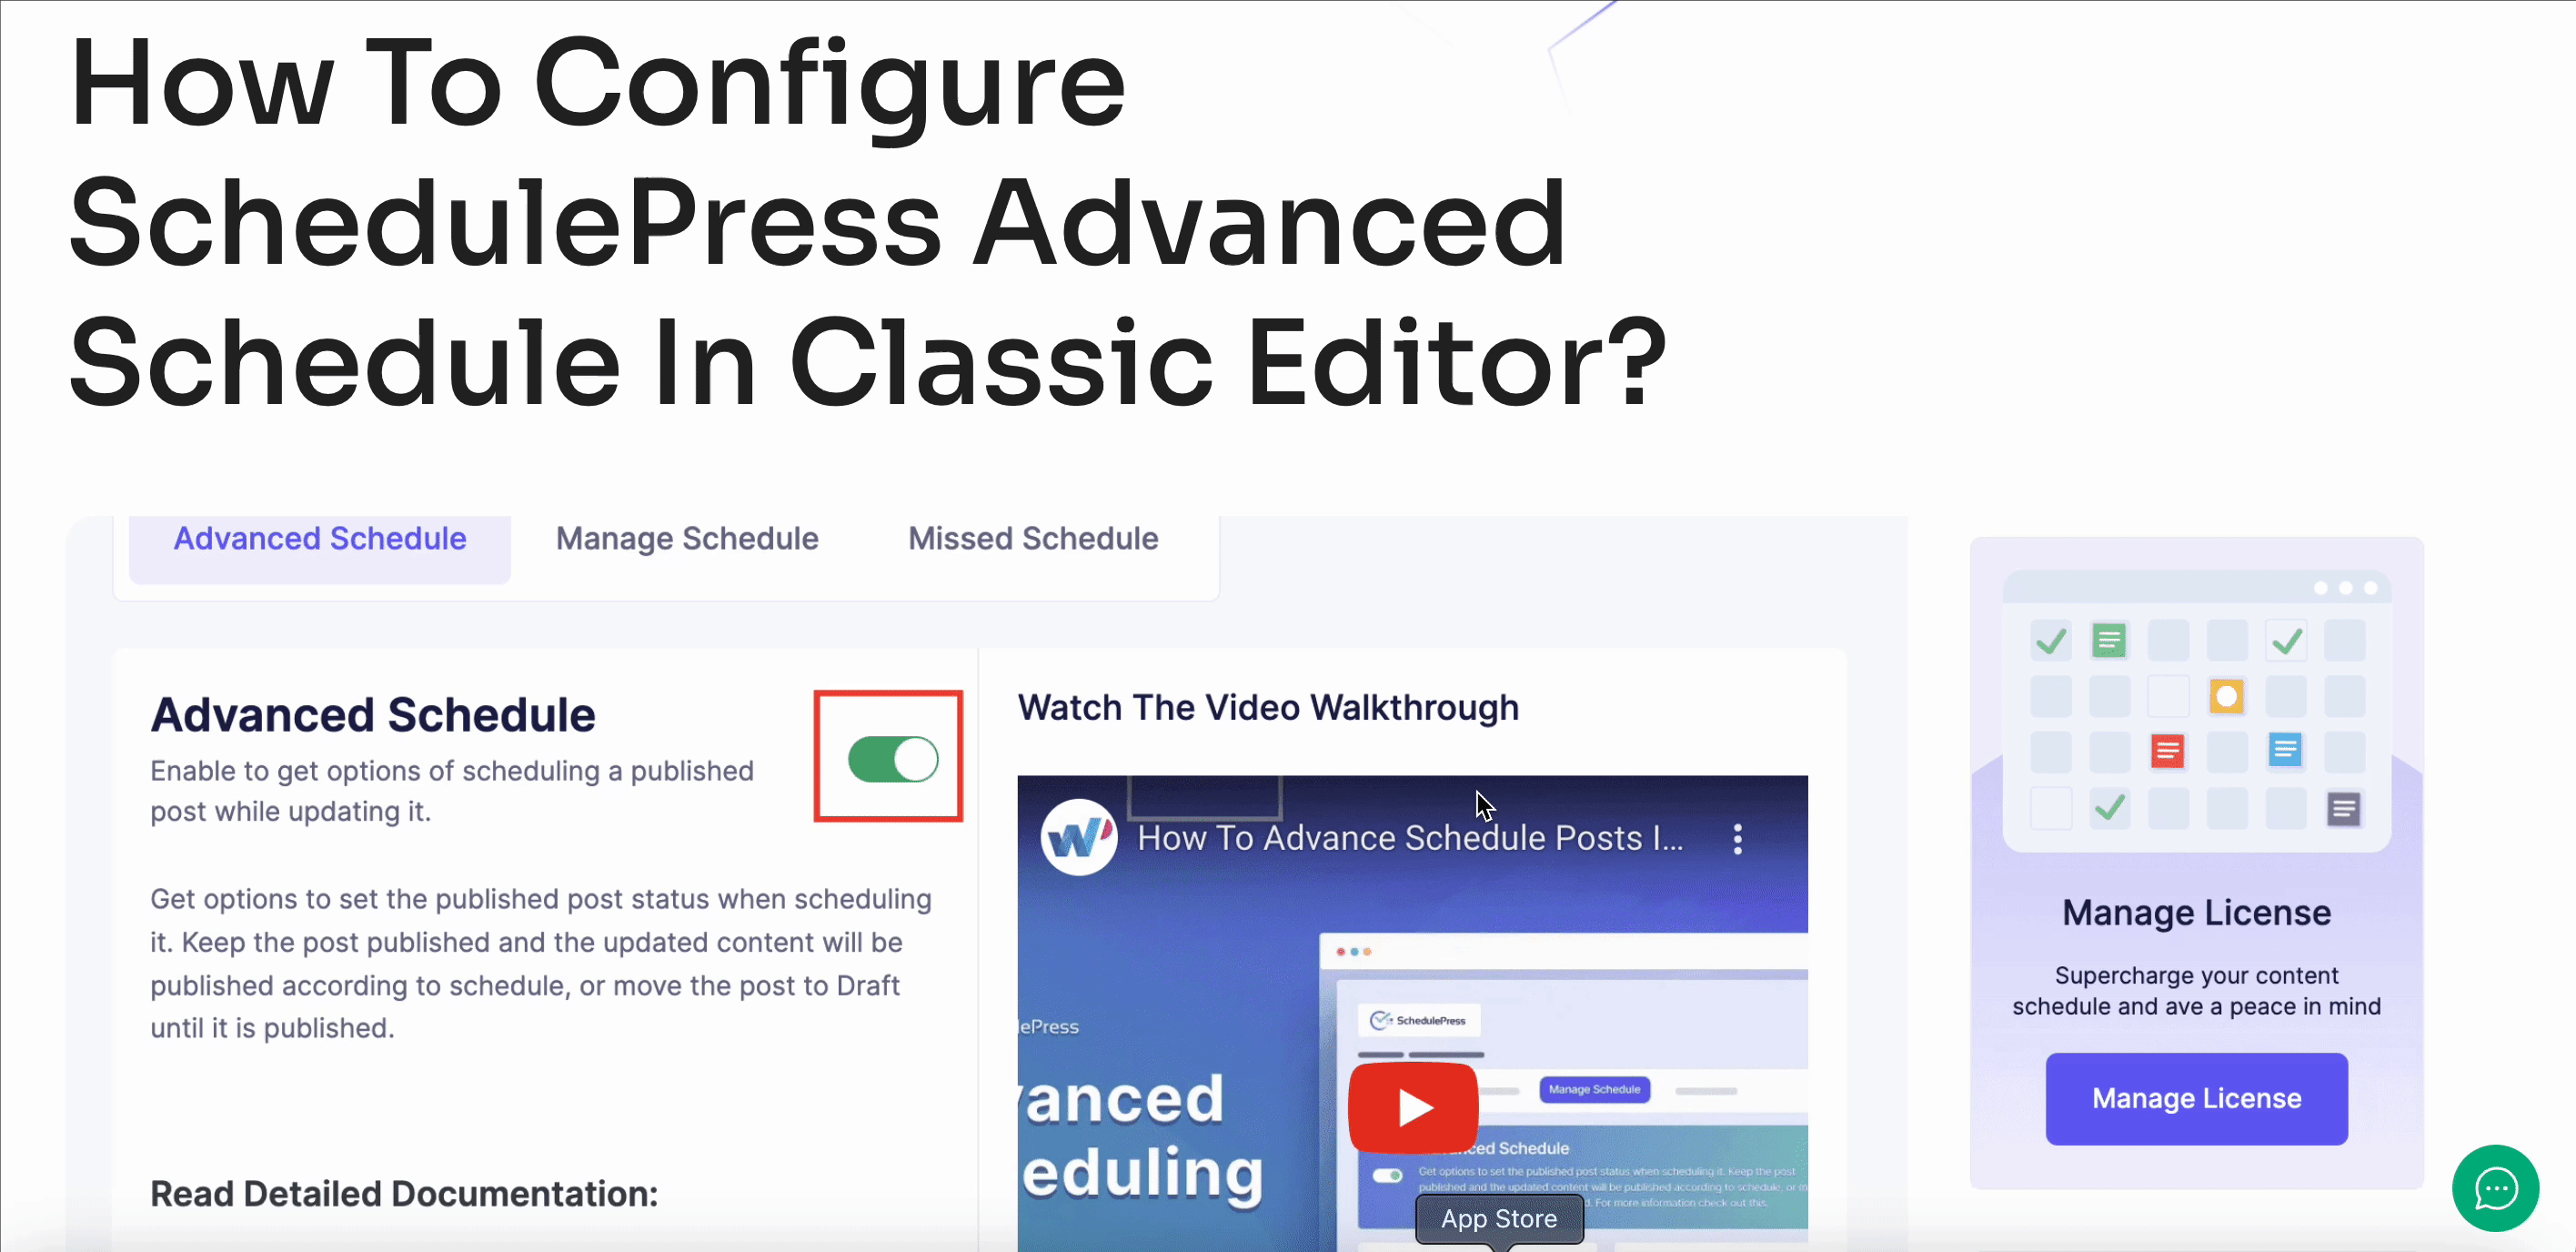 How to Configure SchedulePress Advanced Schedule in Classic Editor? 1